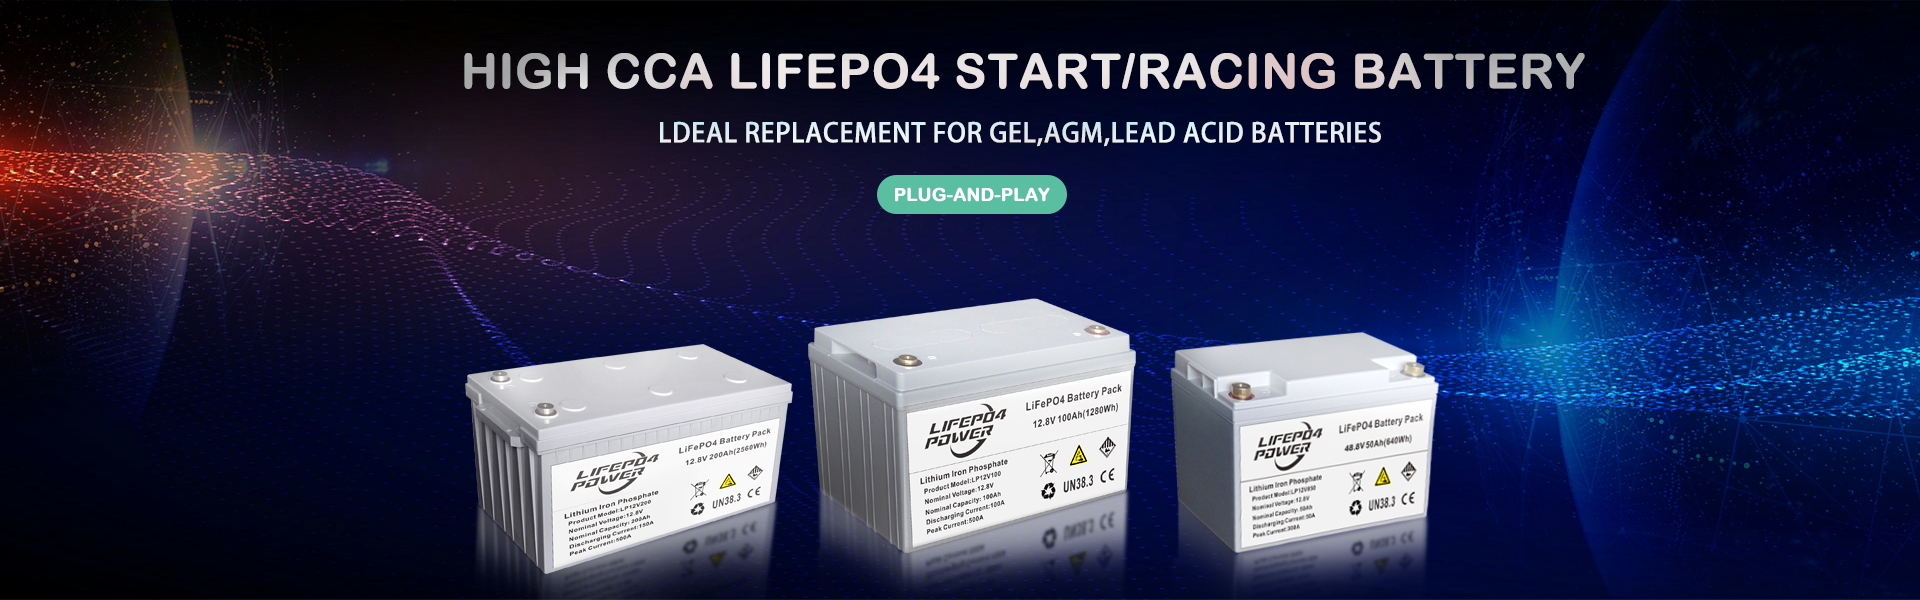 High CCA LiFePO4 Start / Racing Battery Plug-and-Play. Ideal erstatning for GEL, AGM, blybatterier